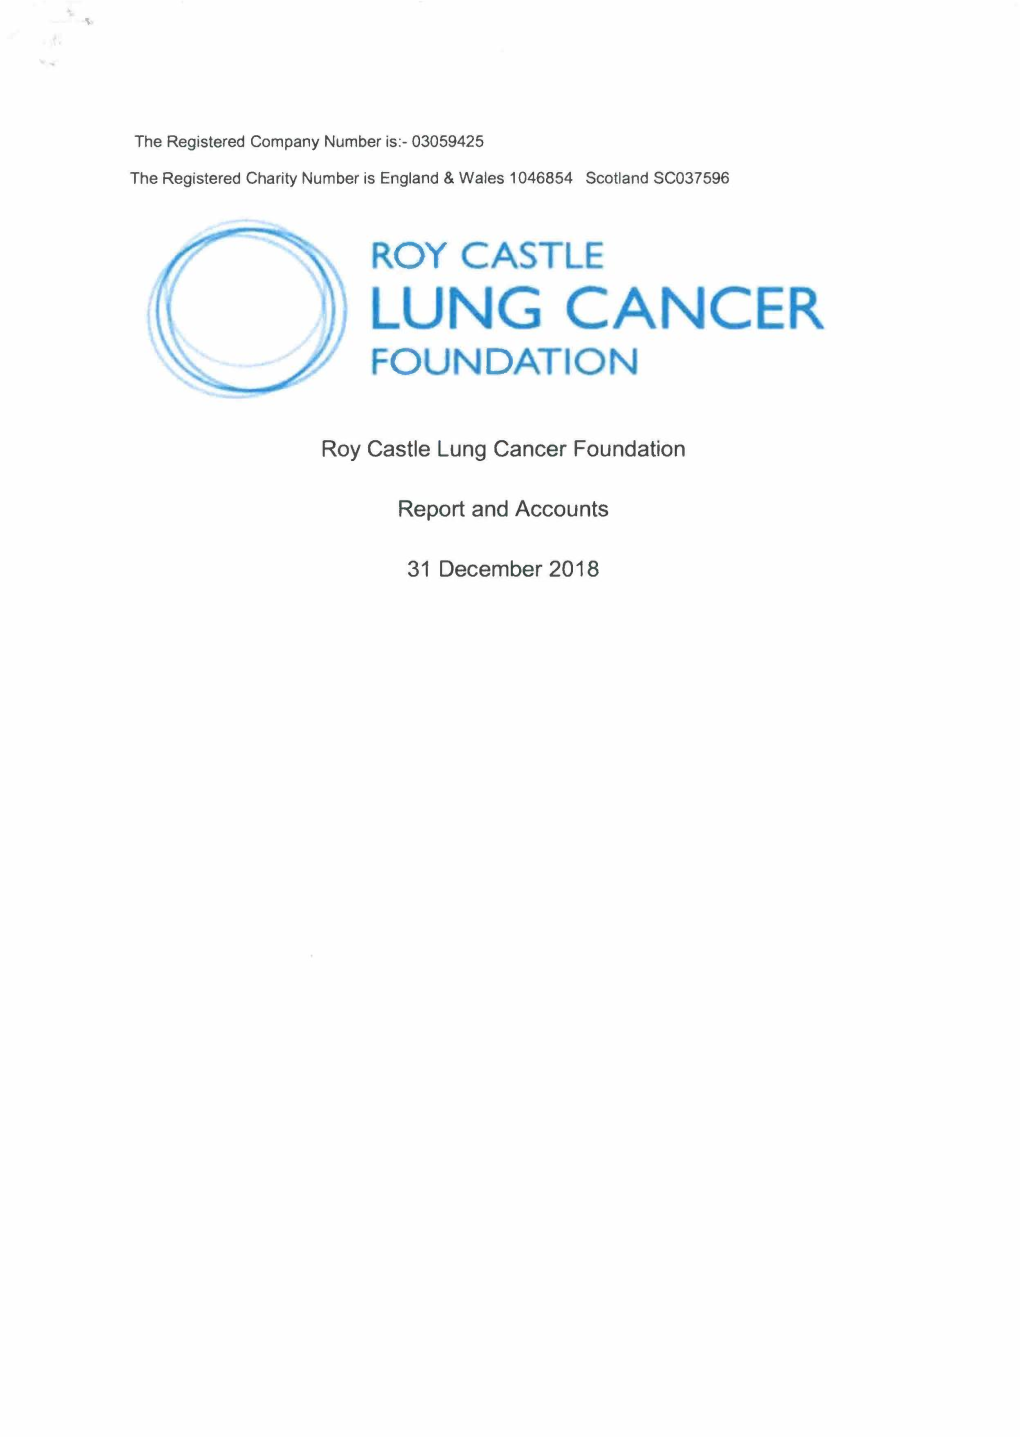 2018 Roy Castle Lung Cancer Foundation